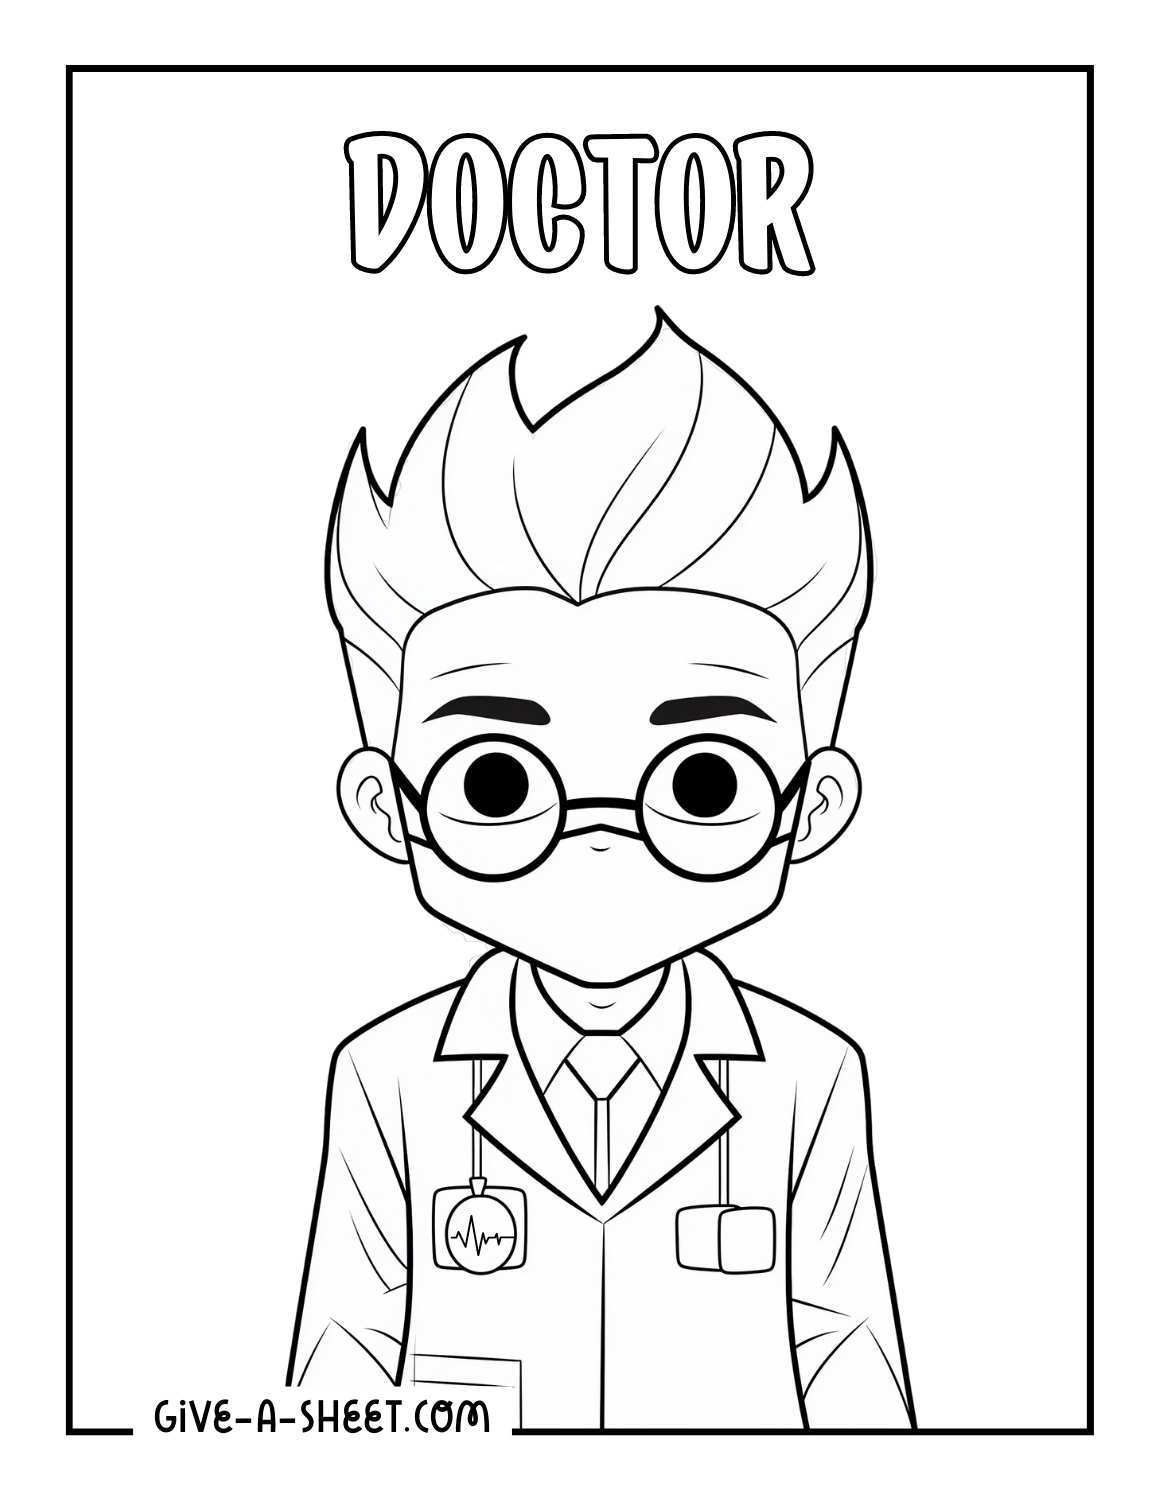 Doctor wearing a mask coloring page.